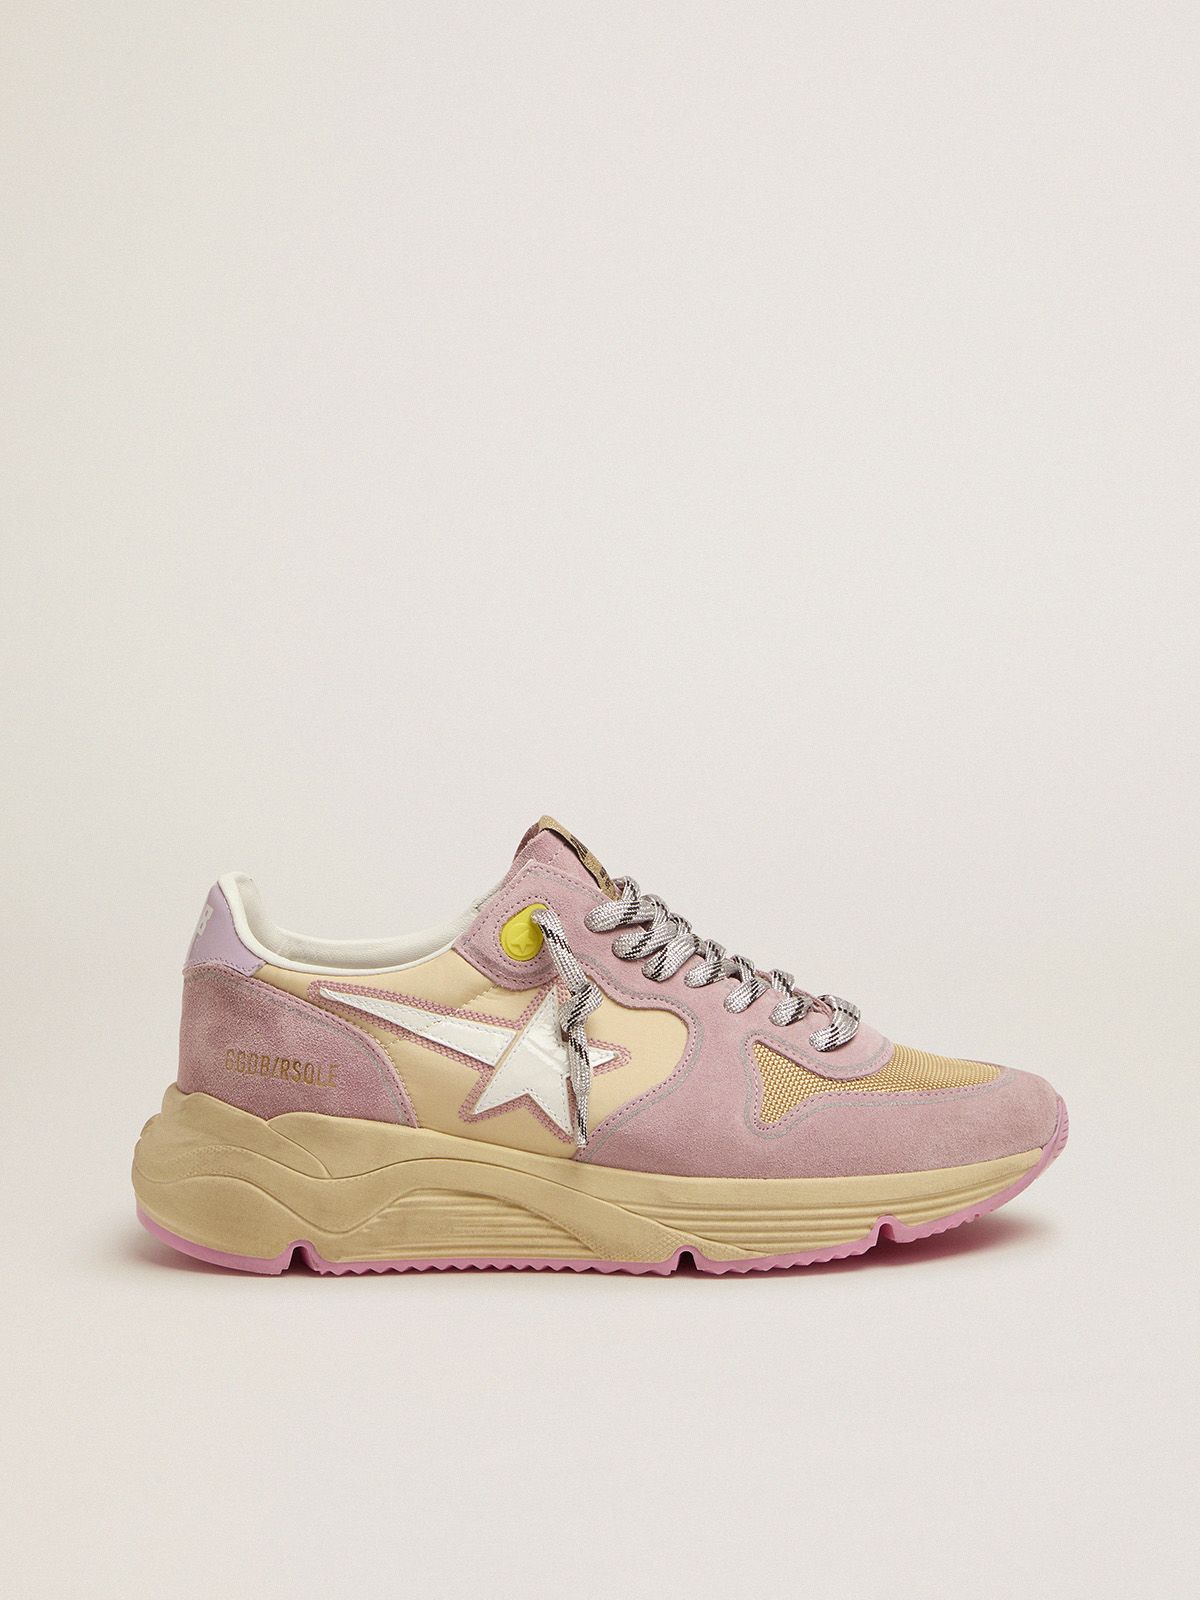 Golden Goose Ball Star Uomo Pastel pink Running Sole sneakers with white star